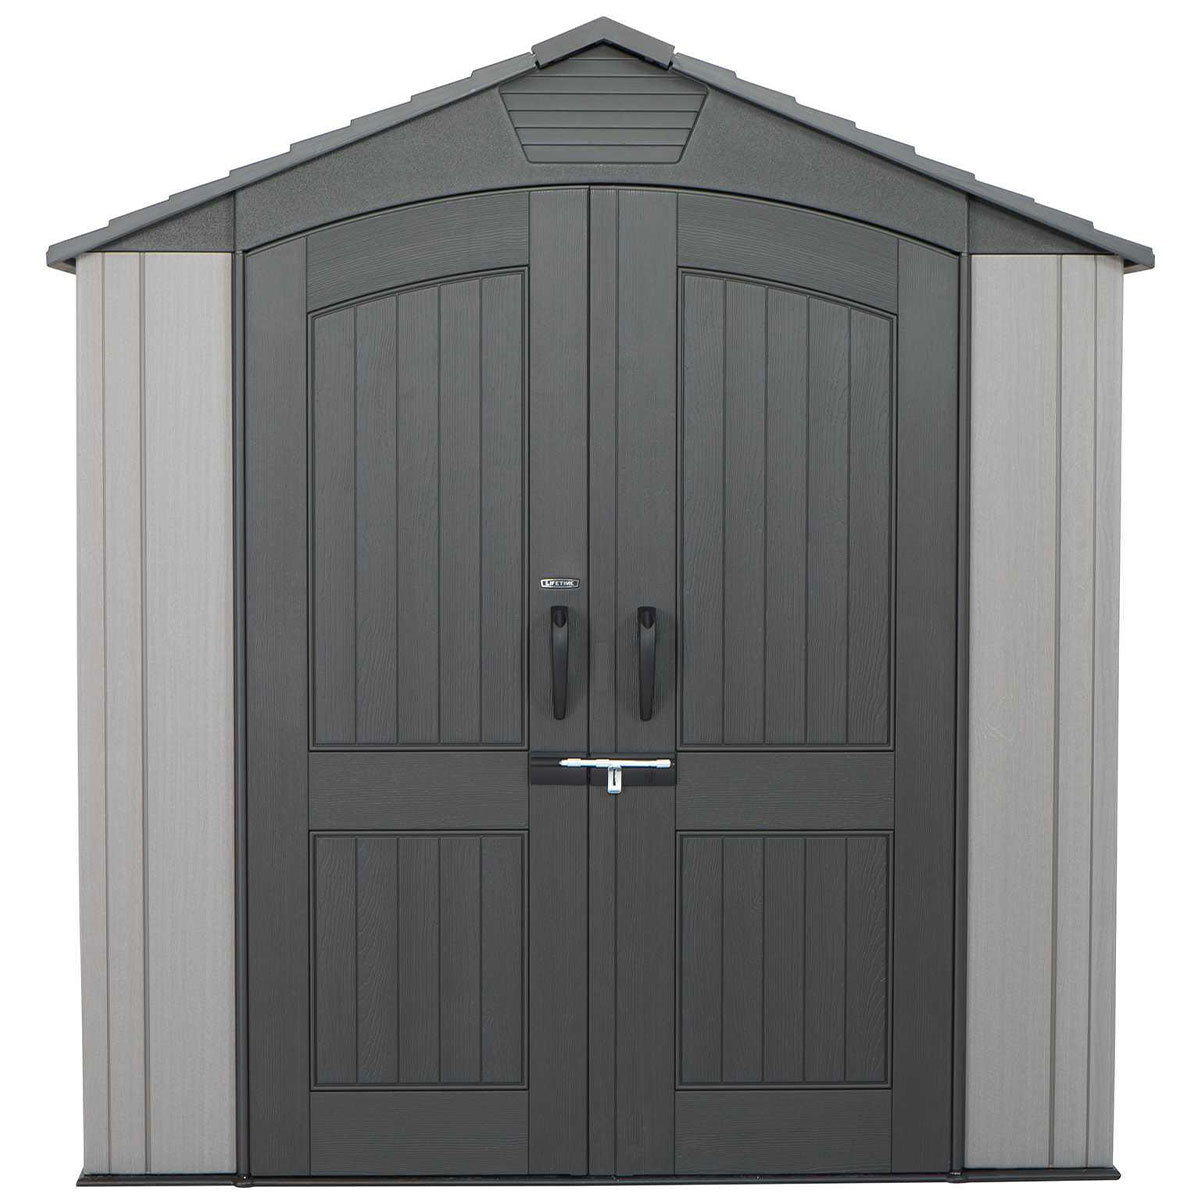 Lifetime 2.1 x 3.6M Outdoor Storage Shed